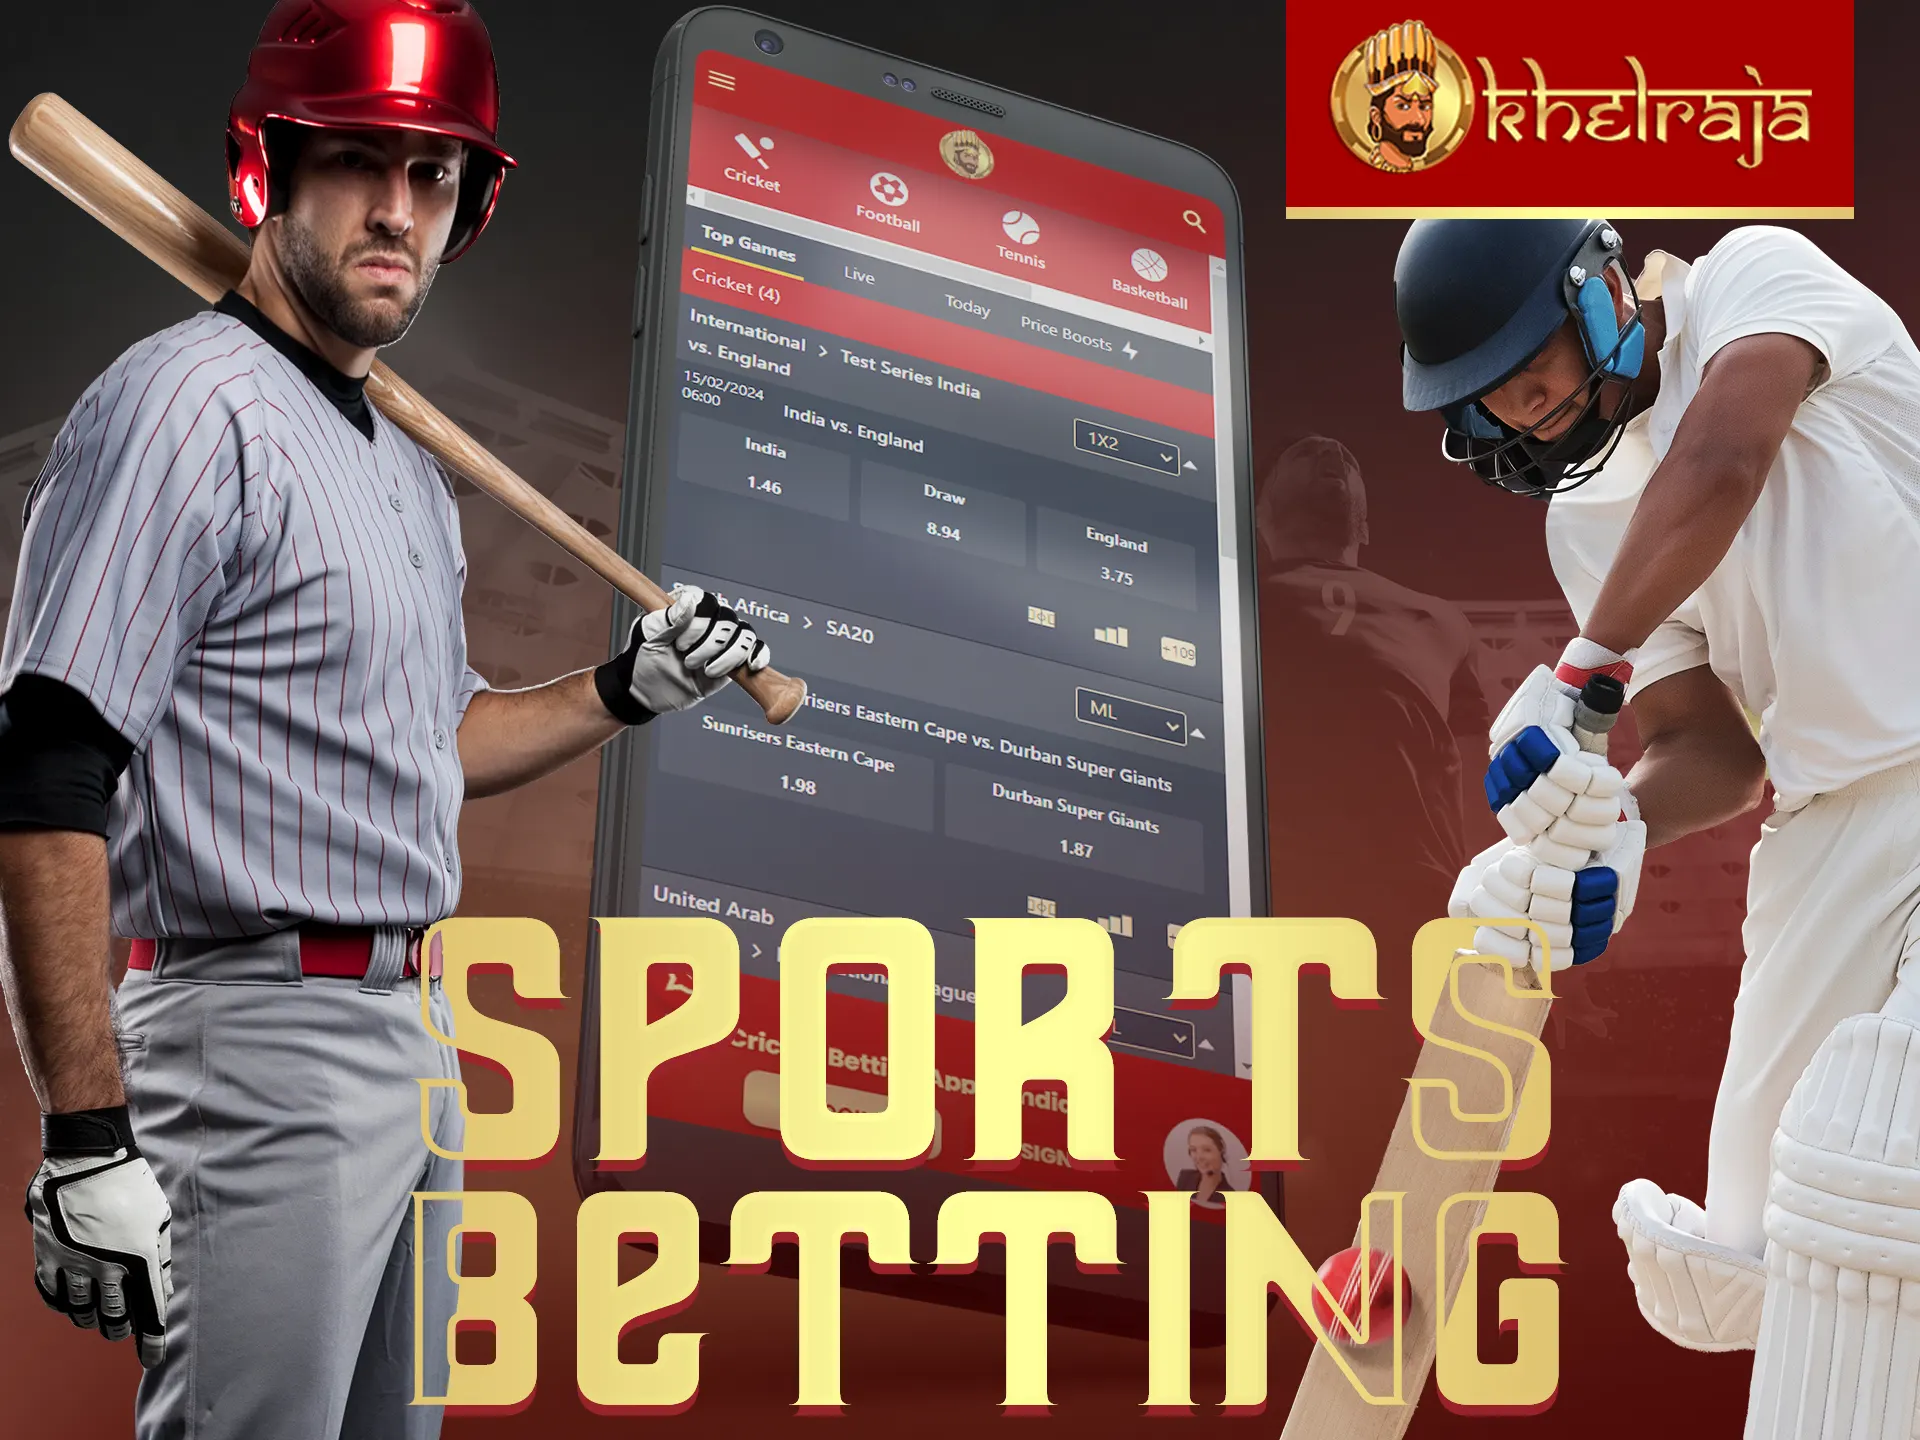 Bet on various sports with Khelraja app anytime.